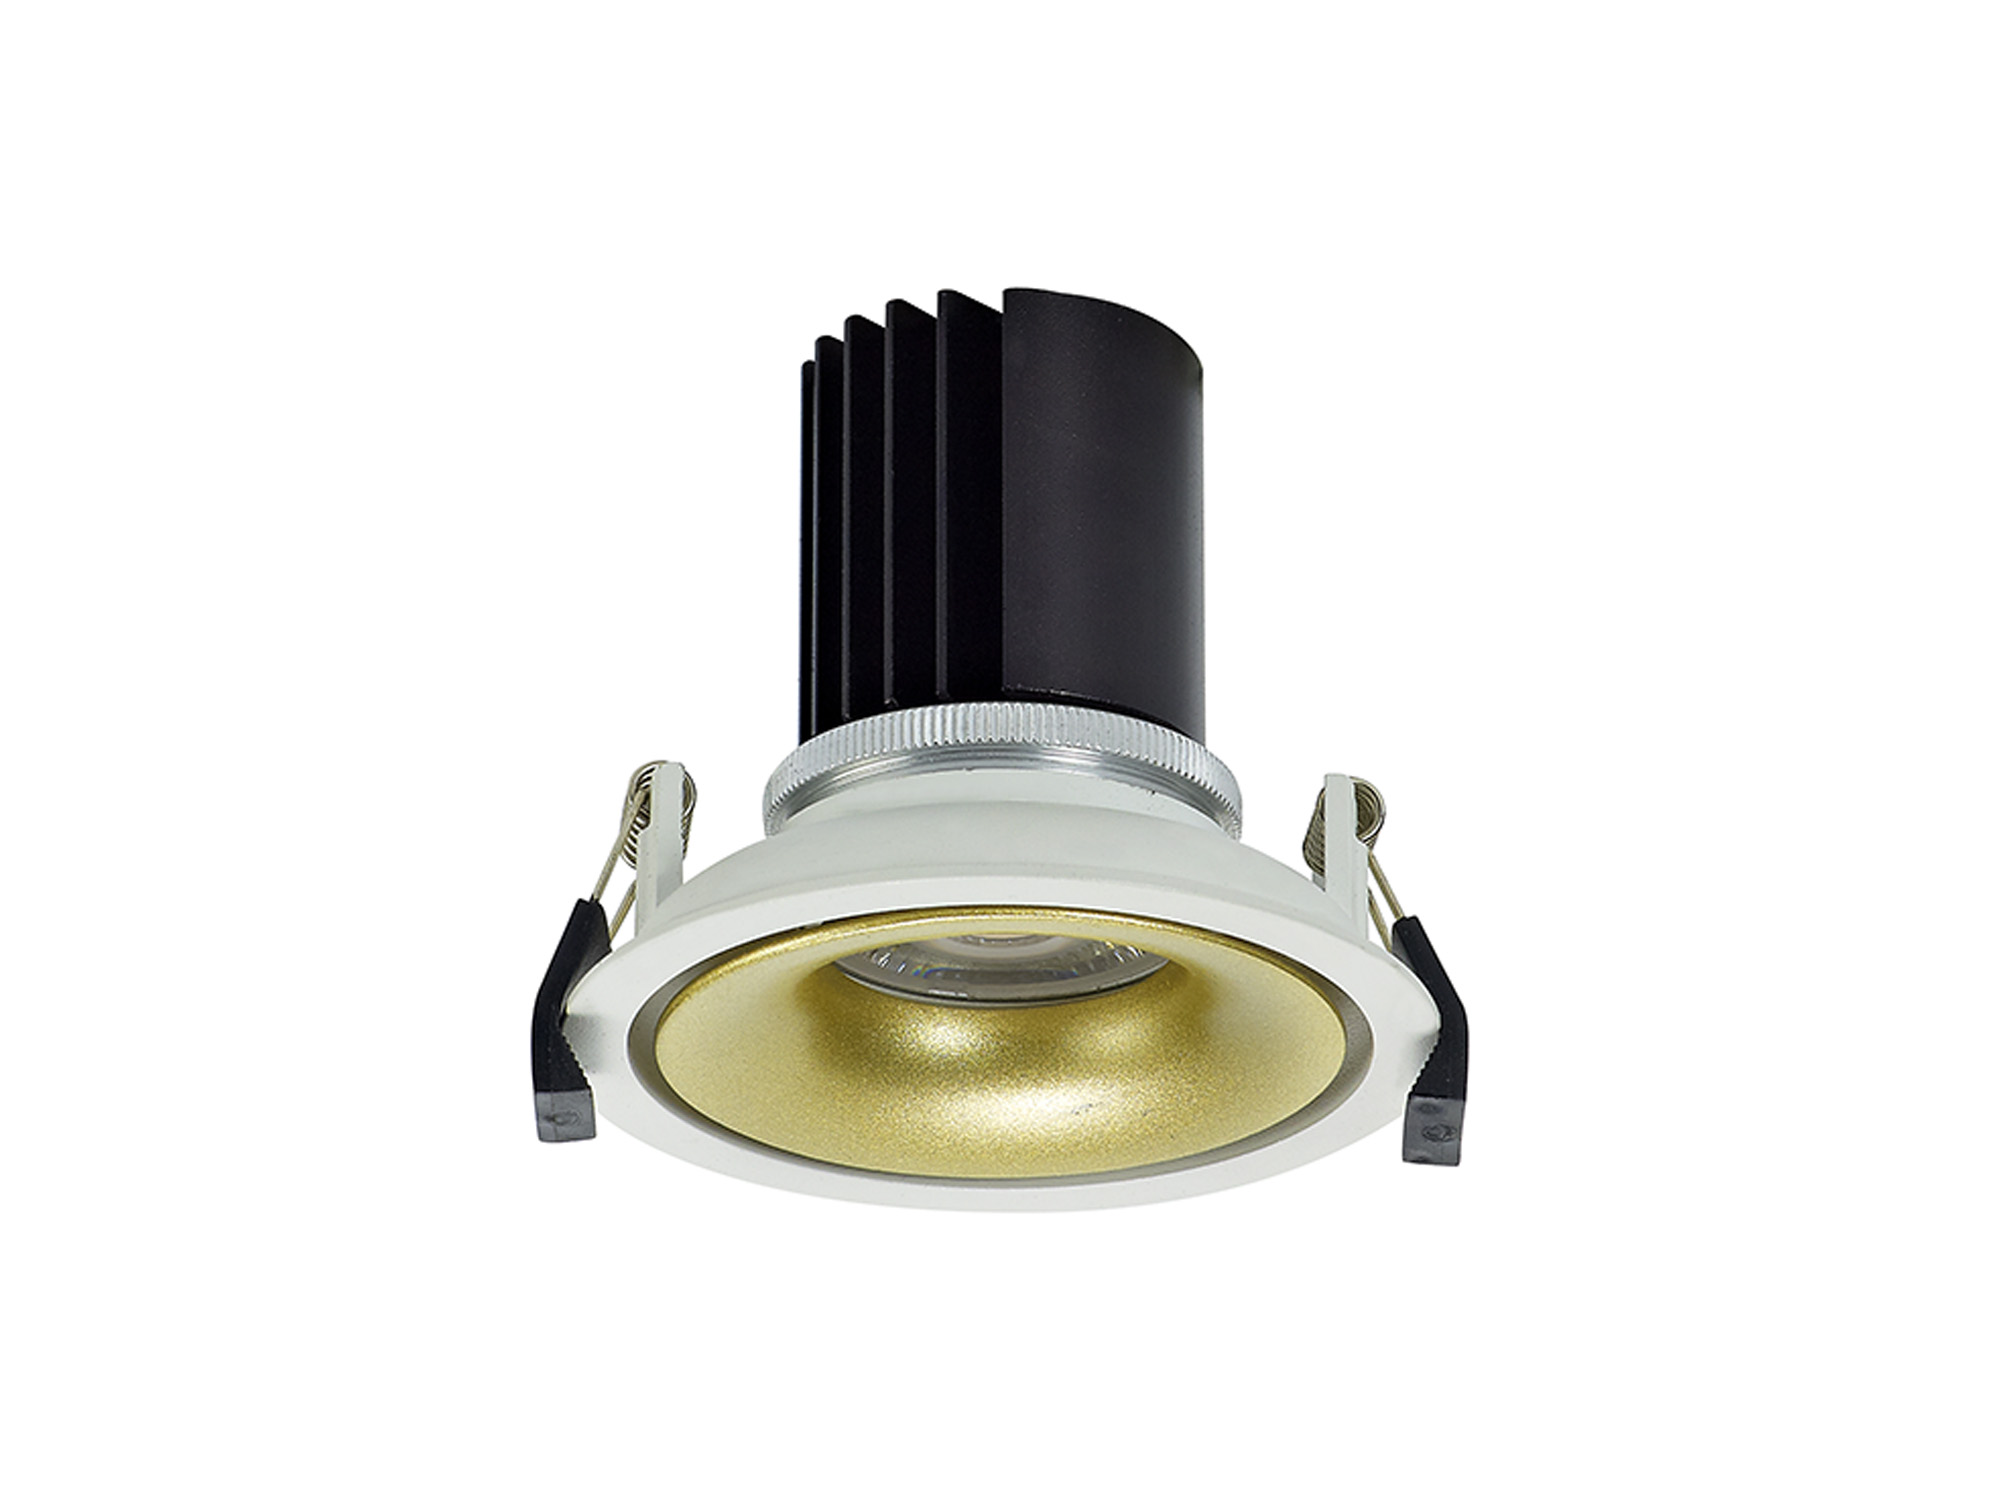 DM202108  Bolor 12 Tridonic Powered 12W 2700K 1200lm 12° CRI>90 LED Engine White/Gold Fixed Recessed Spotlight, IP20